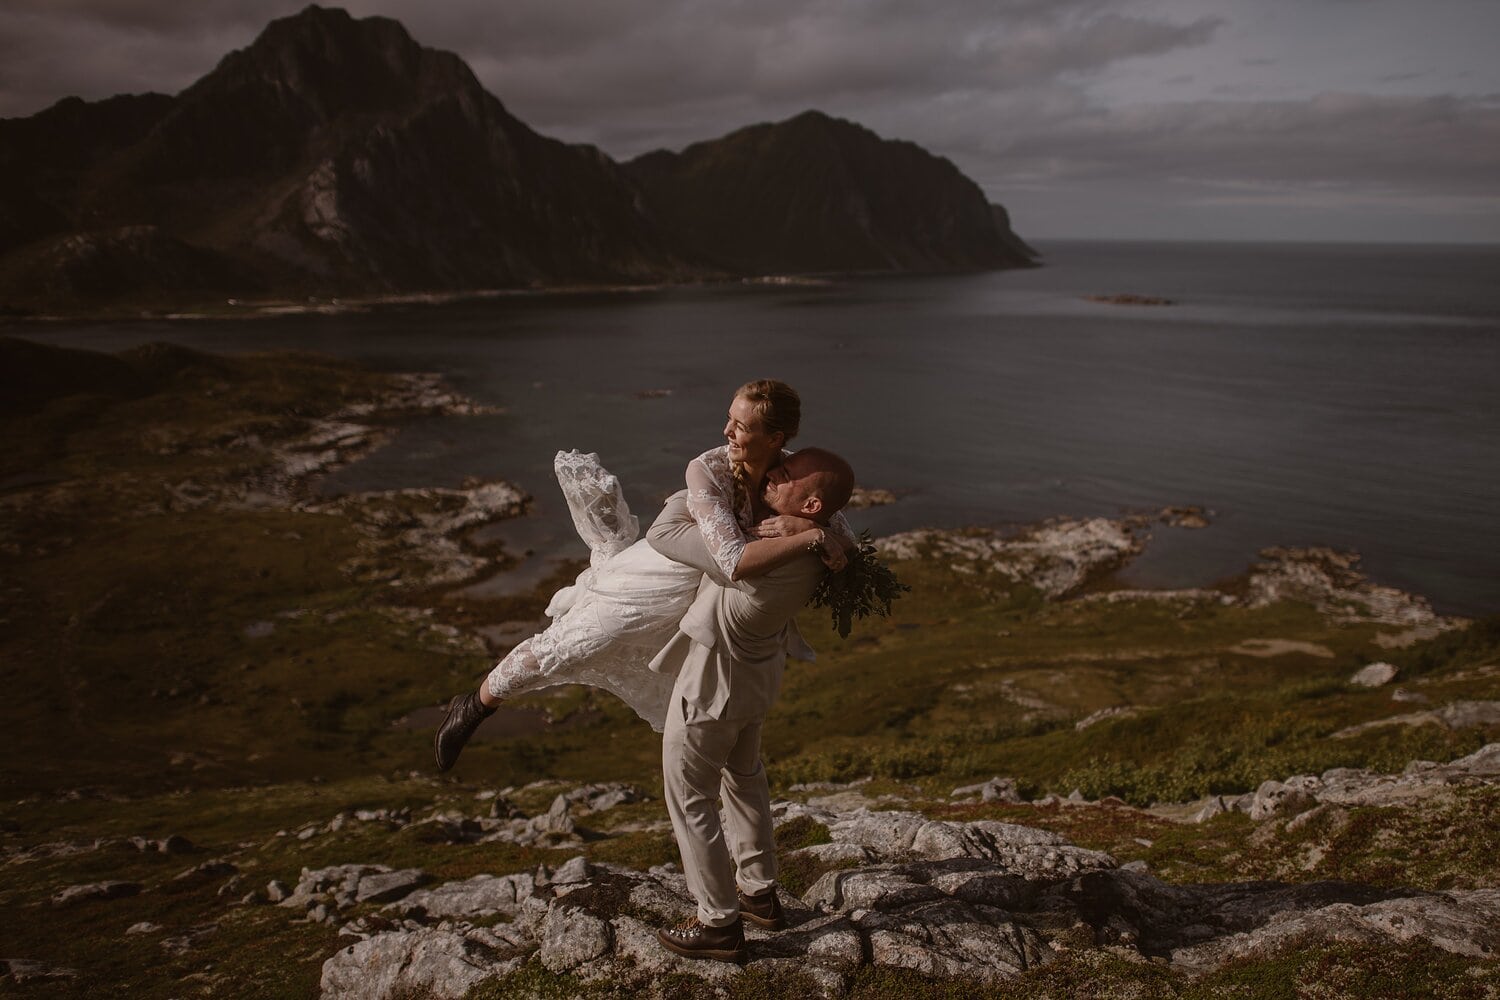 Groom lifts up bride and they are both laughing. There is a beach in the background in Norway.